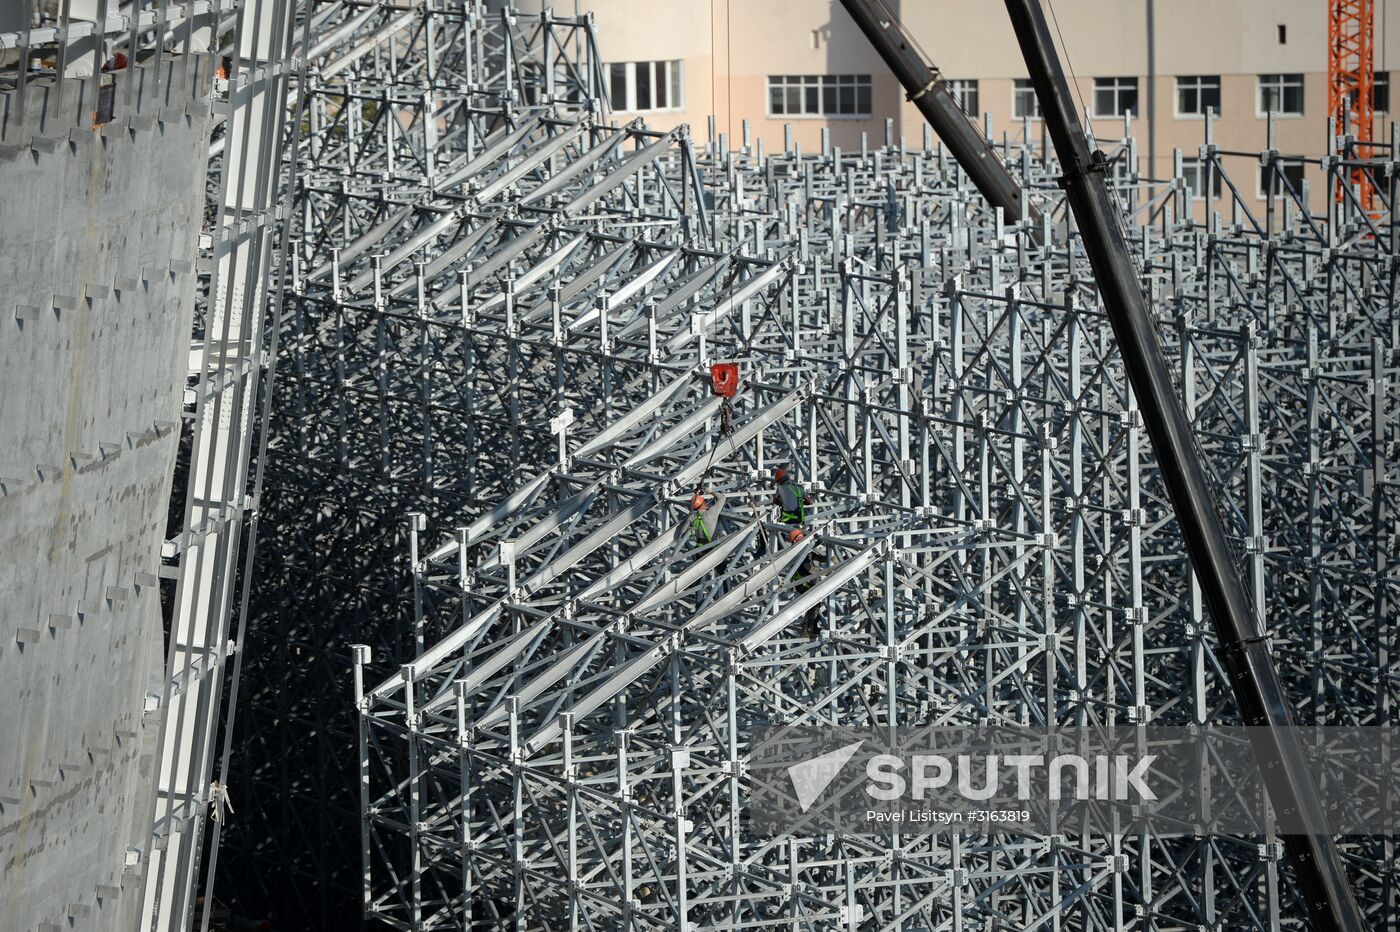 Central stadium in Yekaterinburg under reconstruction for 2018 FIFA World Cup